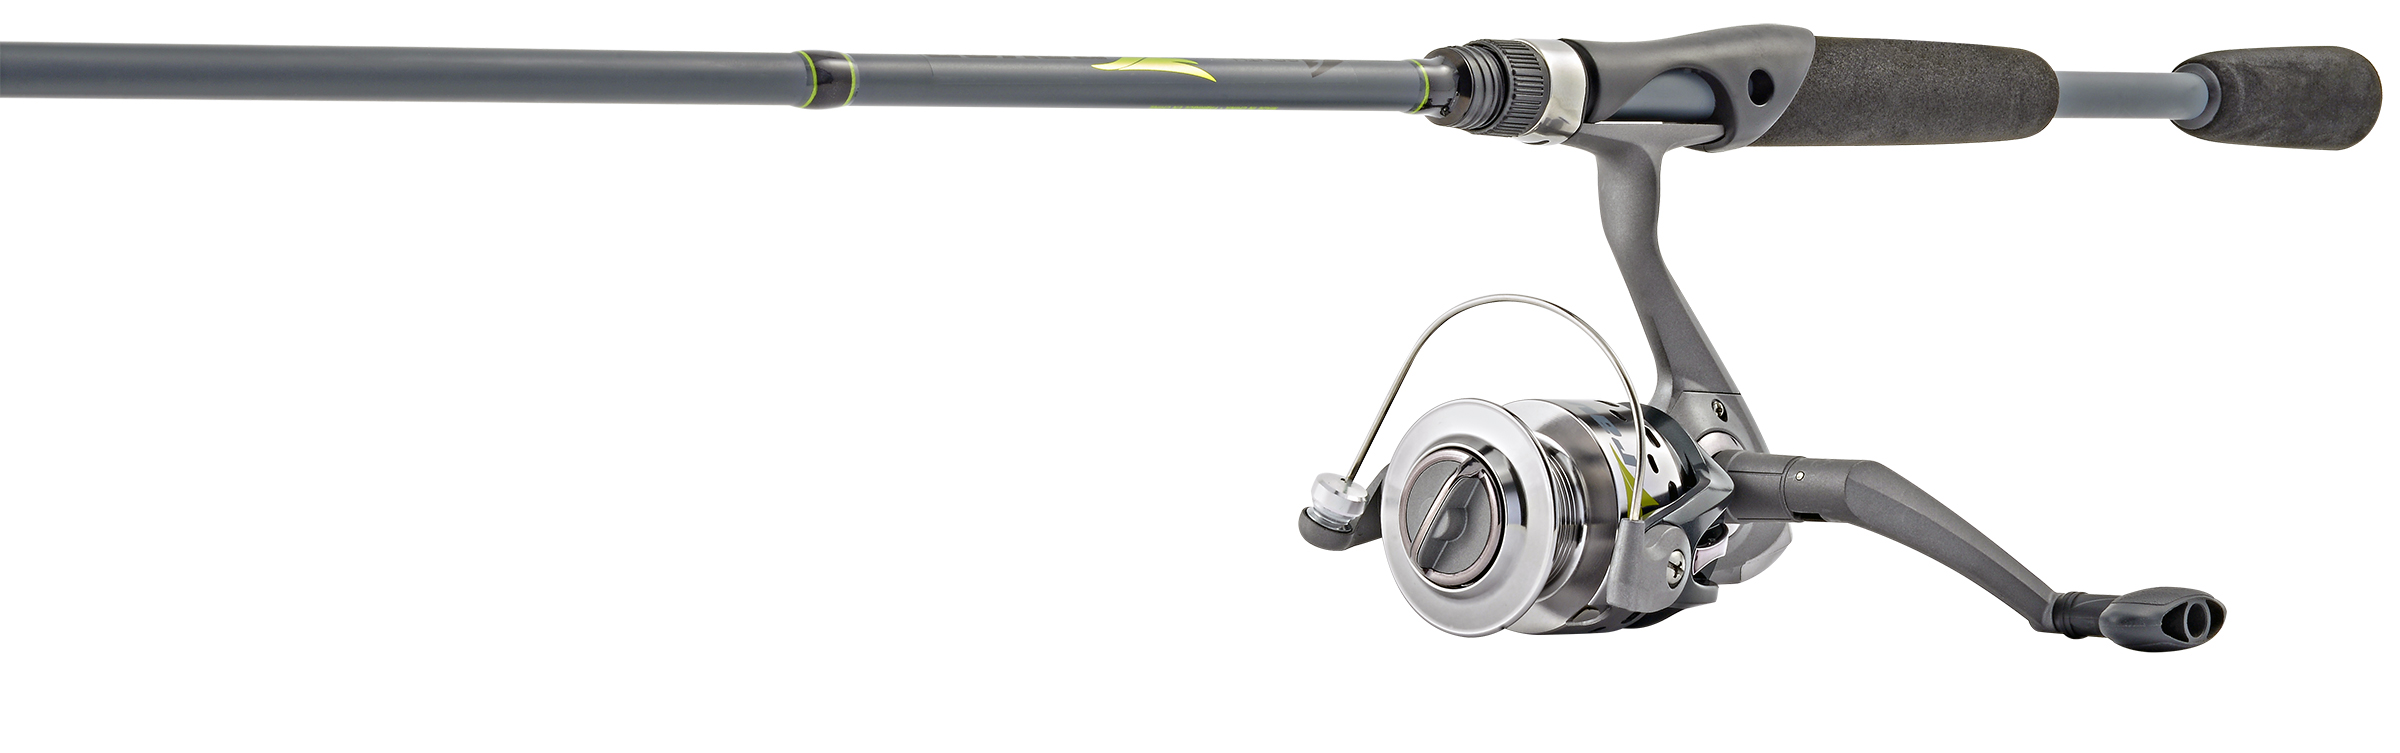 https://cs1.0ps.us/original/opplanet-south-bend-raven-spinning-rod-and-reel-combo-6-111103-main